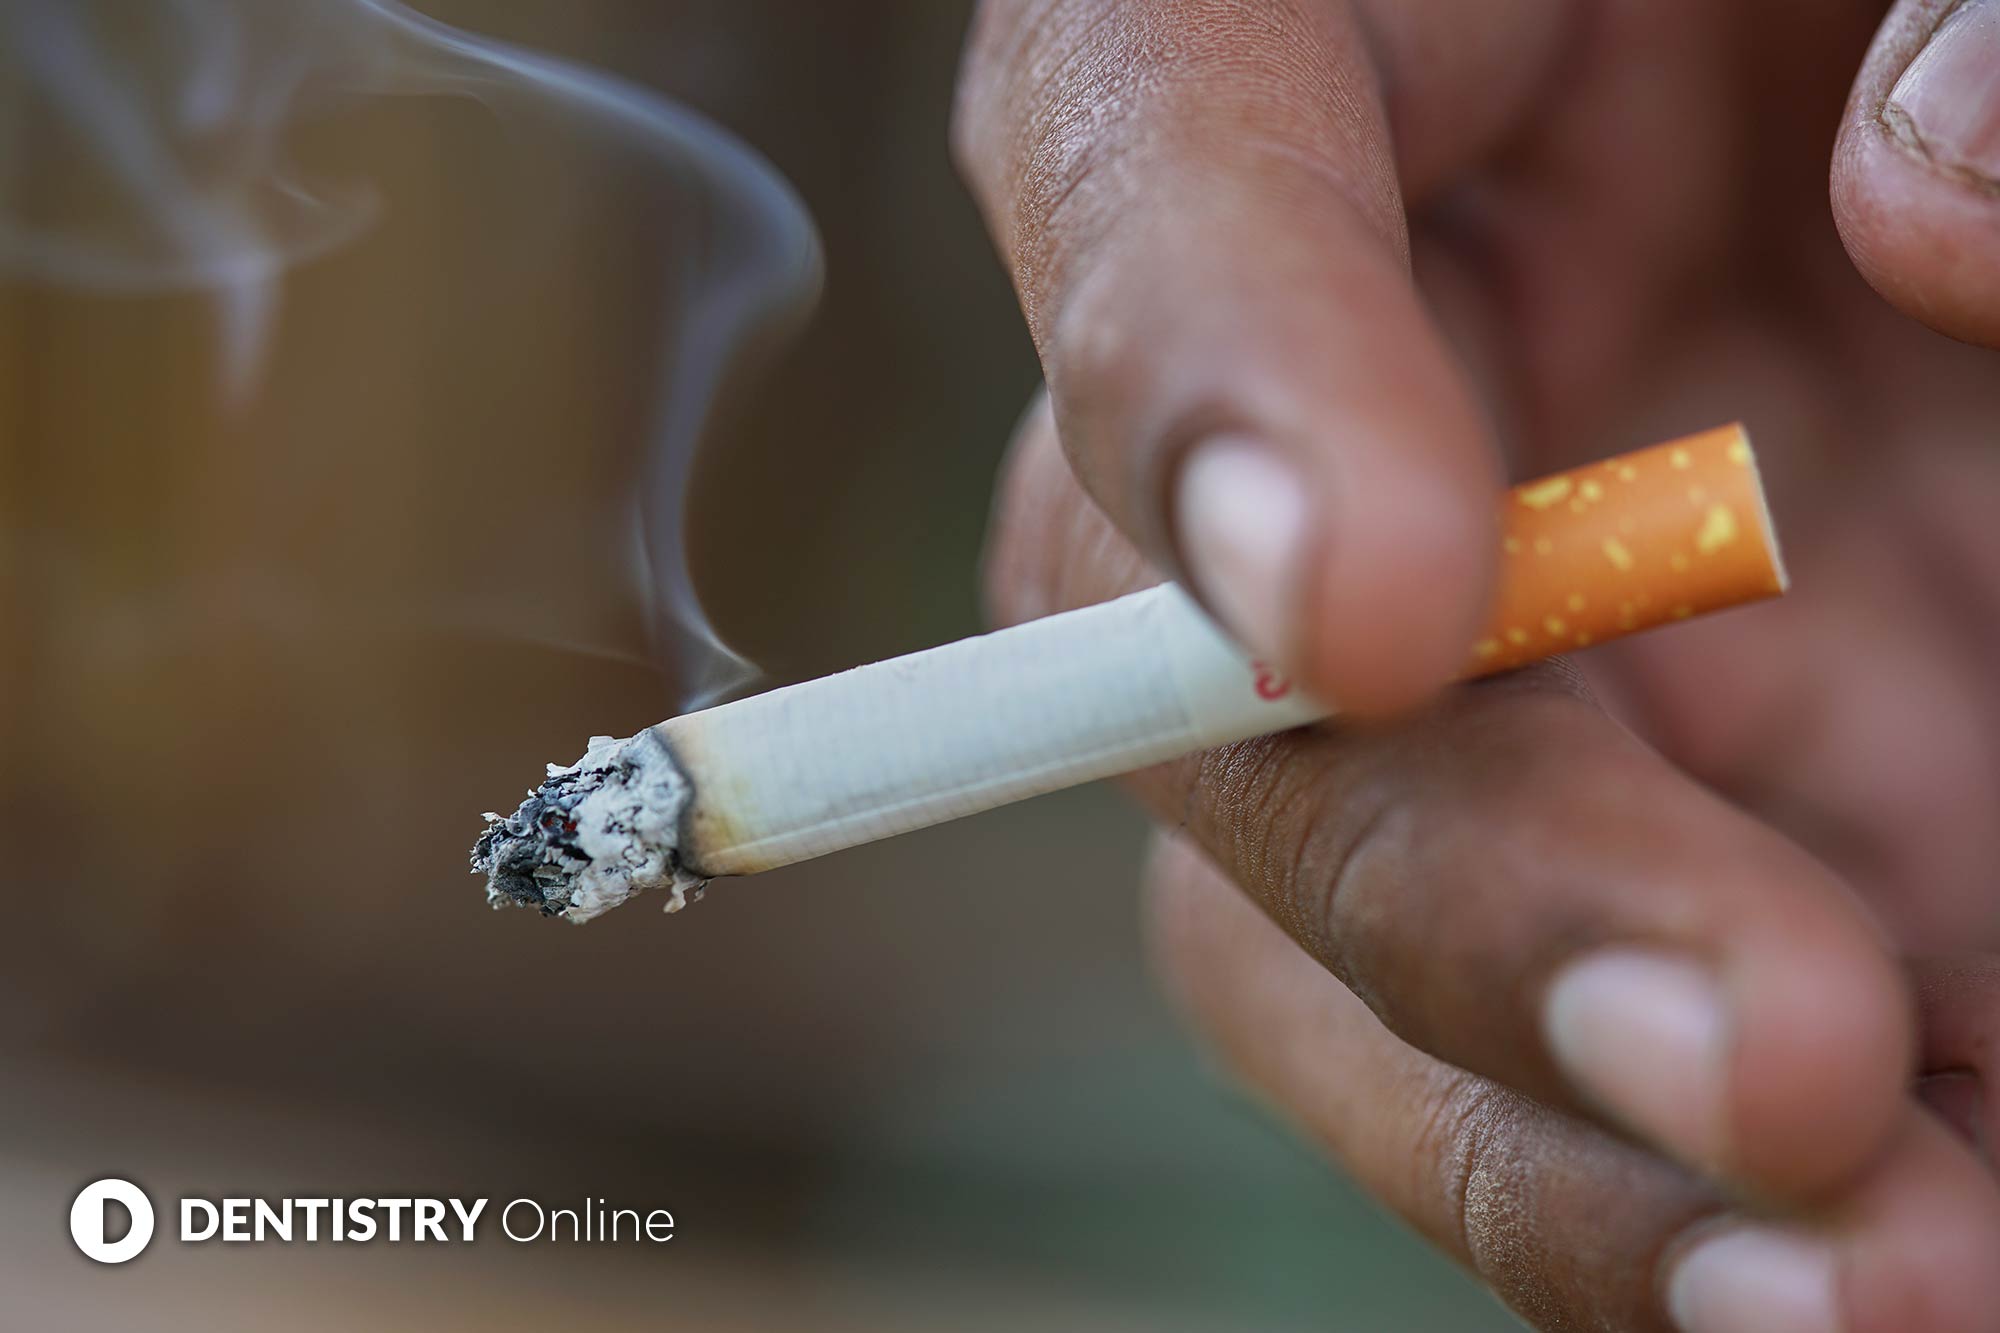 Eight in 10 adults over the age of 18 are set to make healthier changes, such as cutting back on smoking